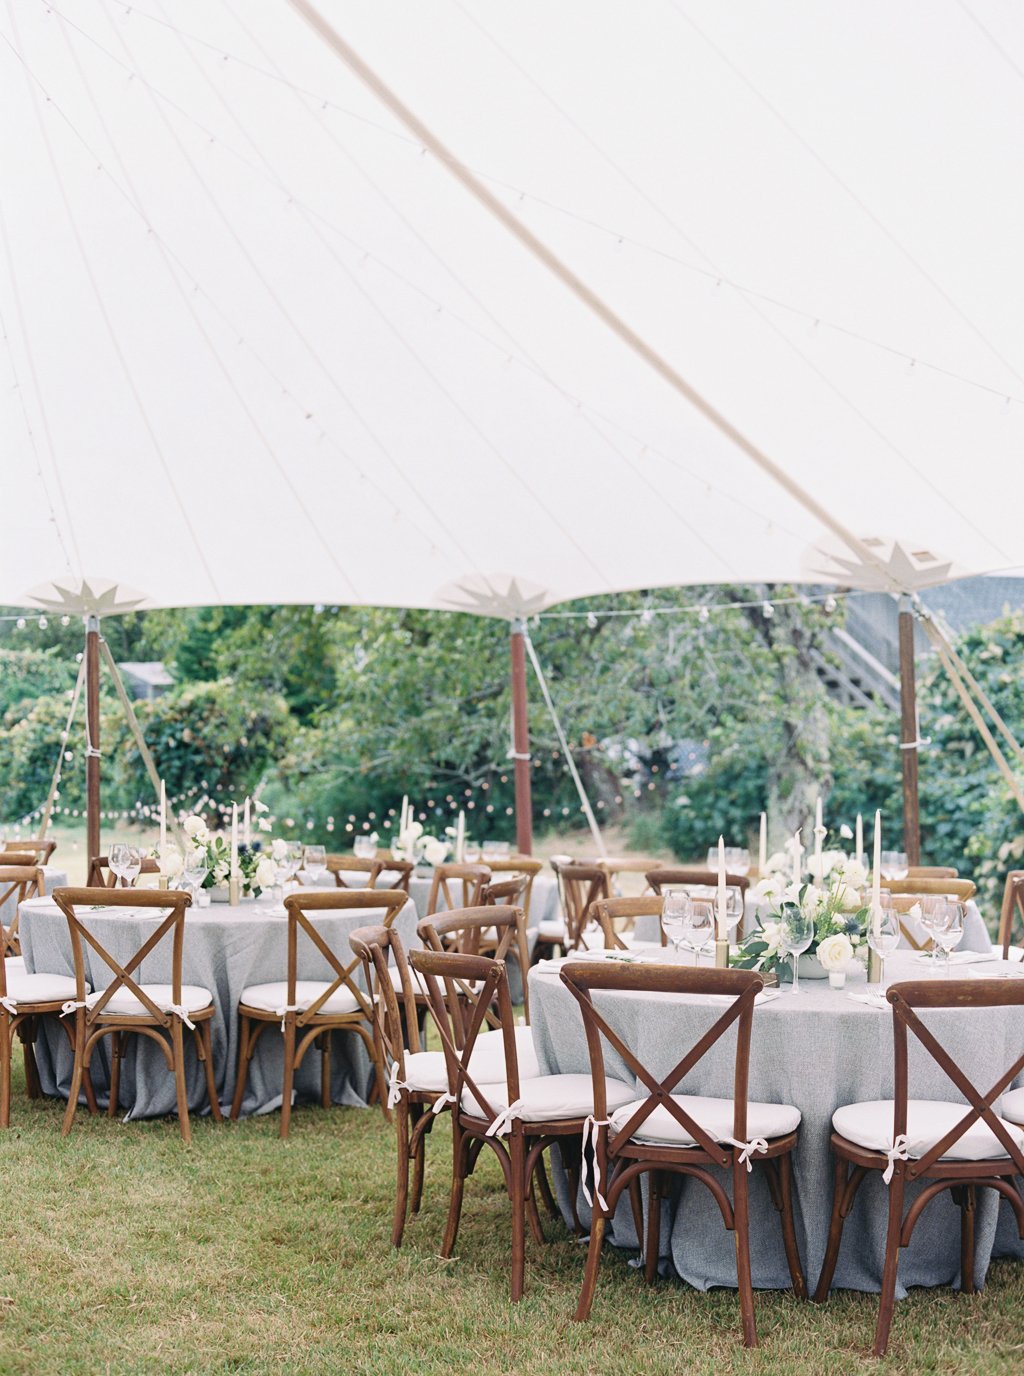 Classic Tented Wedding Reception Venue in The Hamptons, NY